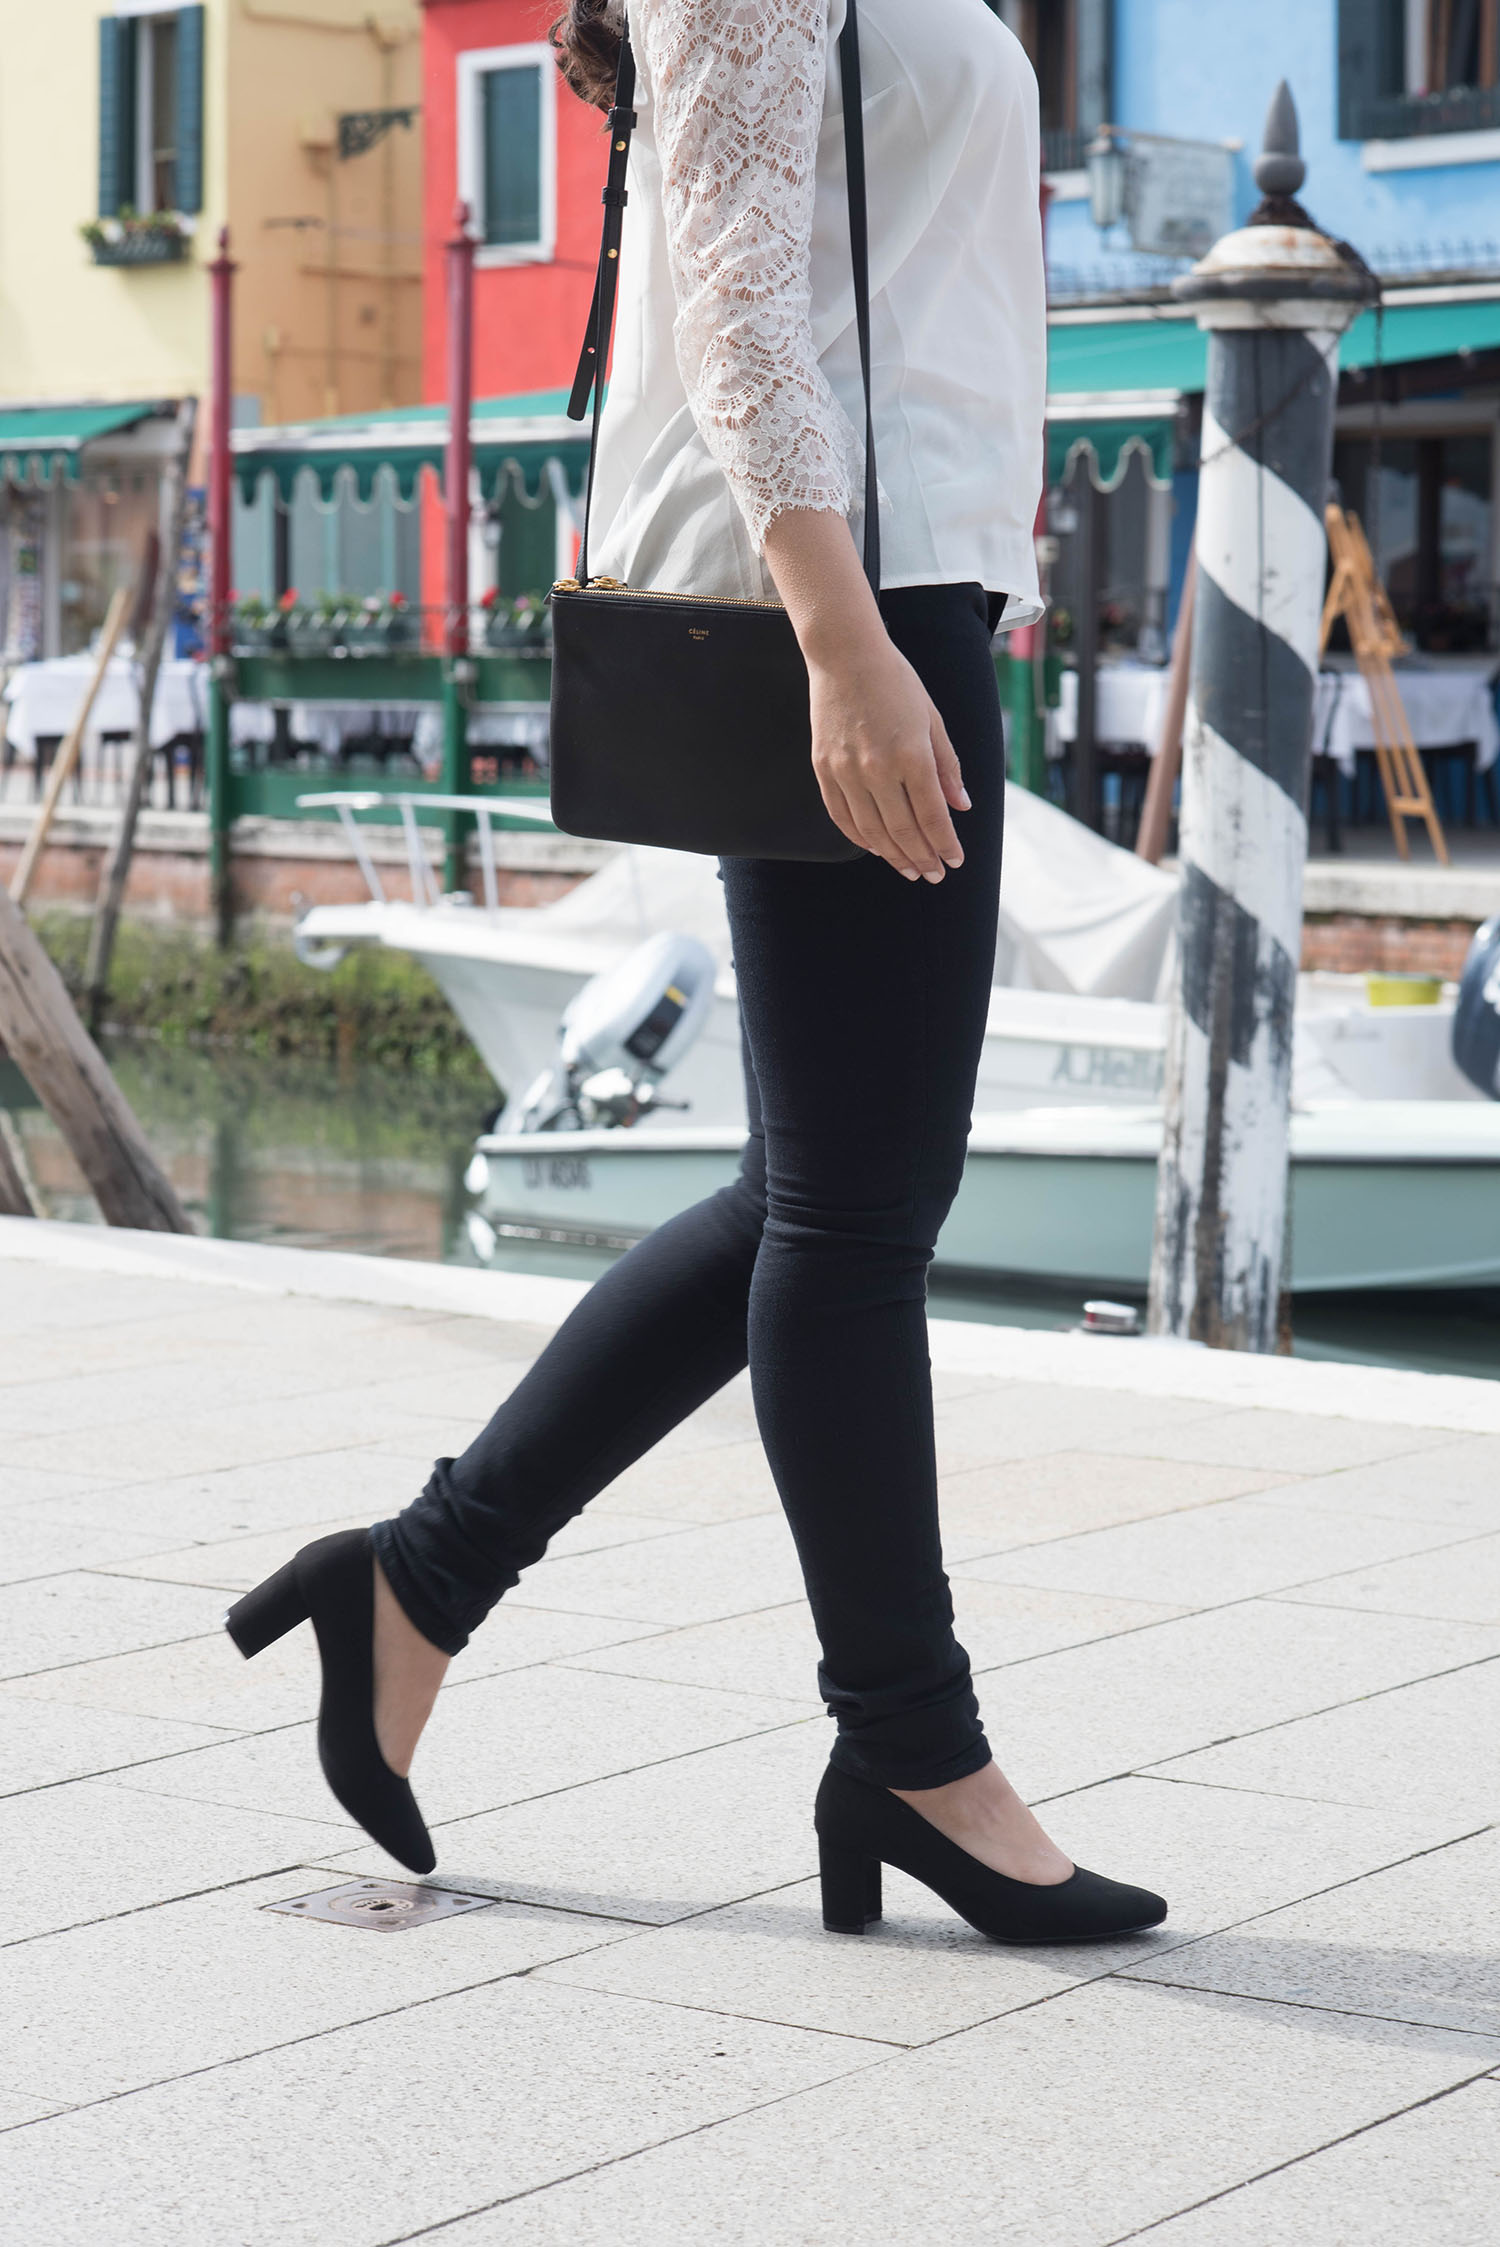 Outfit details on fashion blogger Cee Fardoe of Coco & Vera wearing black Mavi jeans and H&M block heels